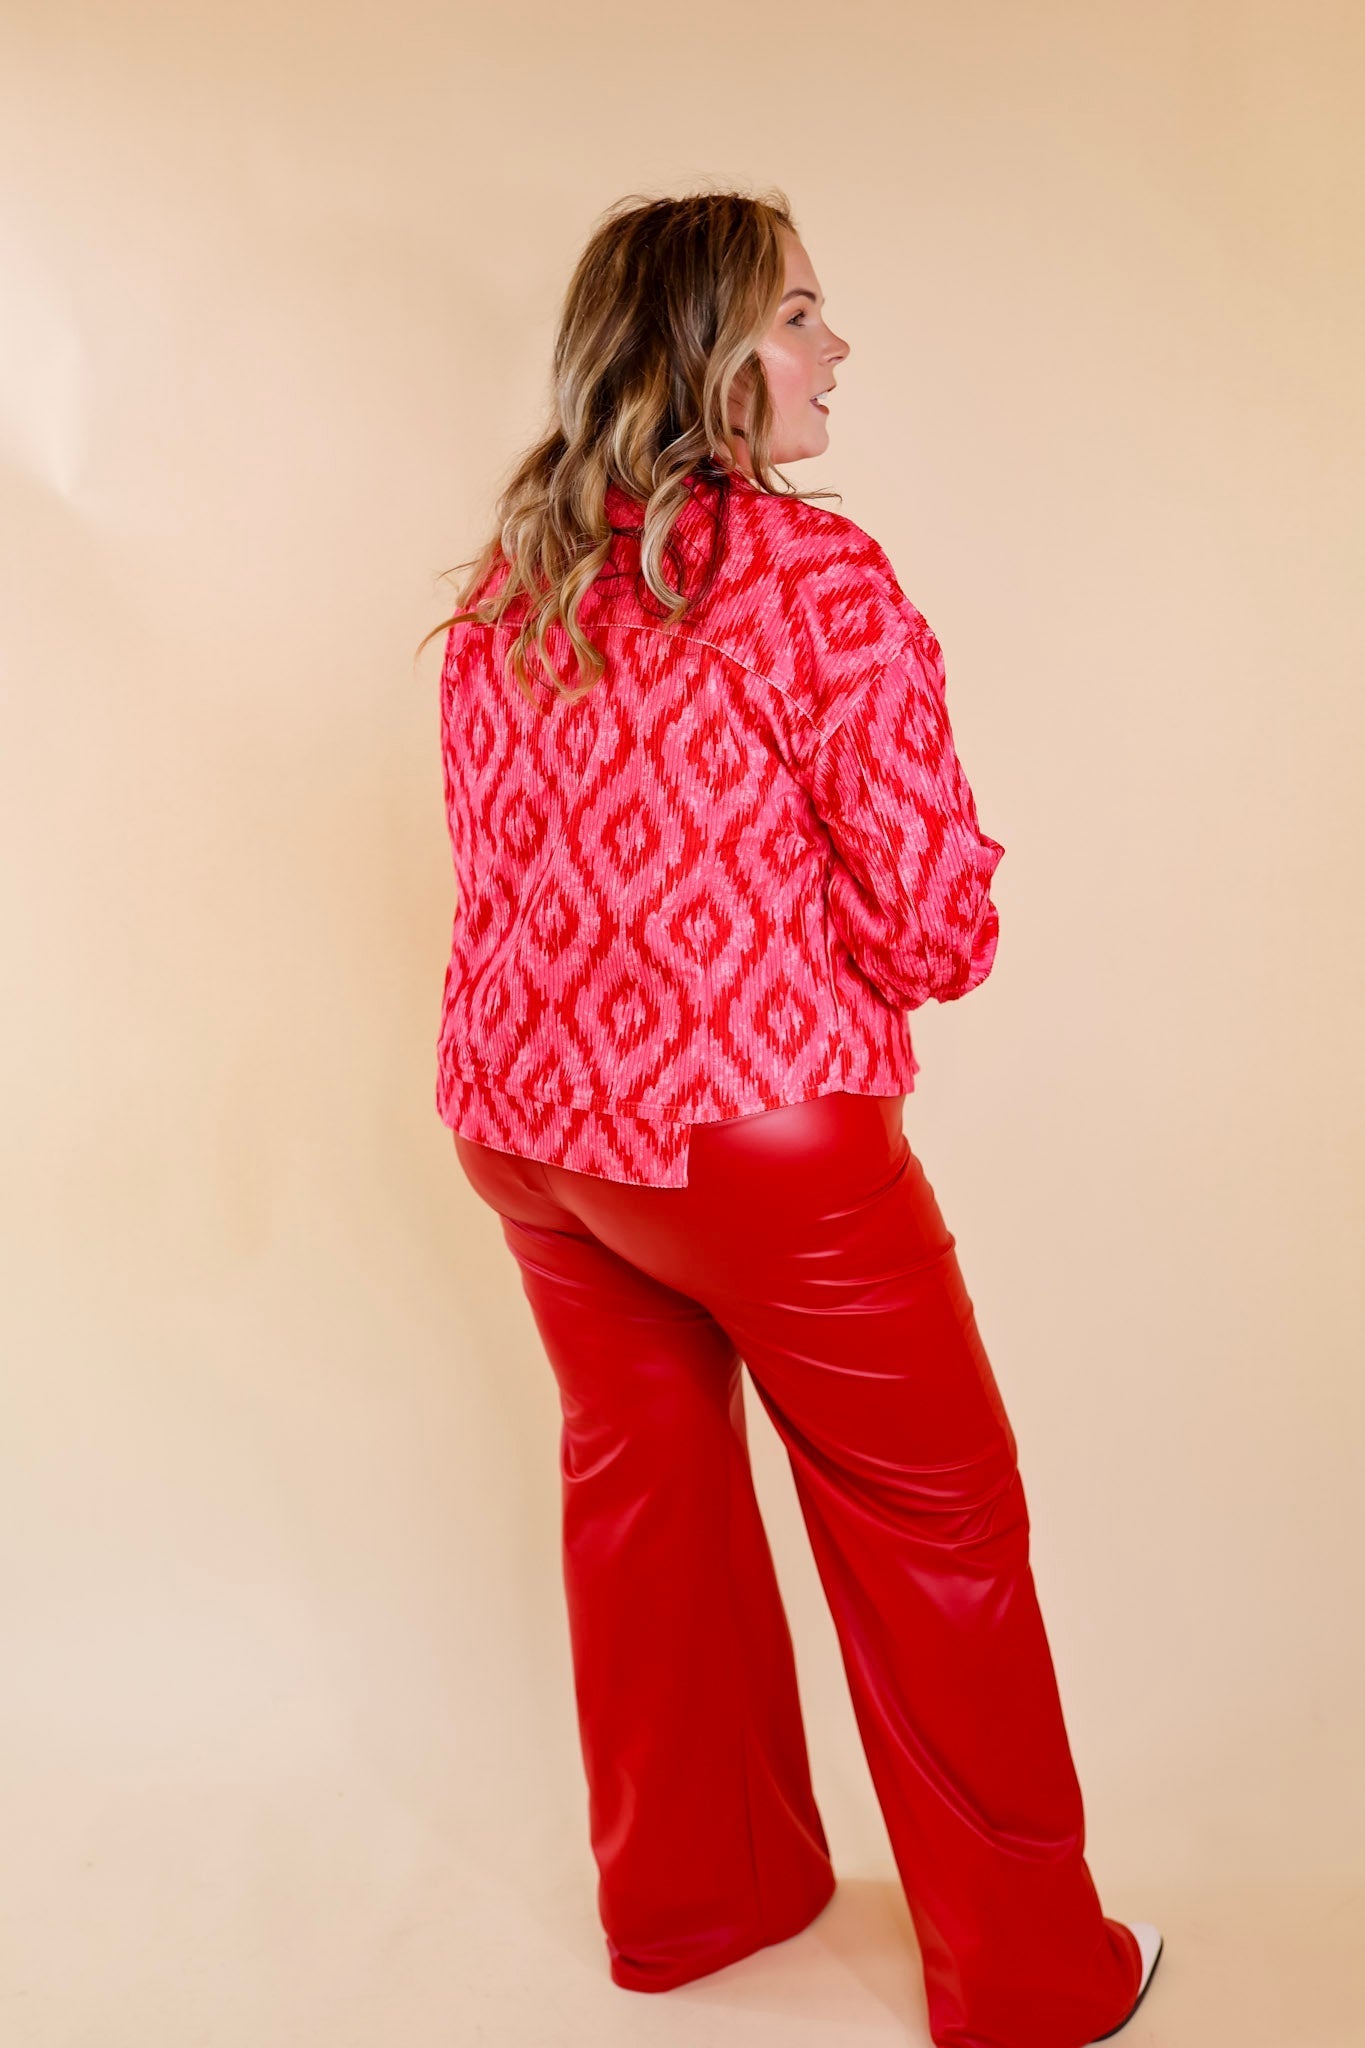 New In Town Mosaic Print Corduroy Jacket in Pink and Red - Giddy Up Glamour Boutique